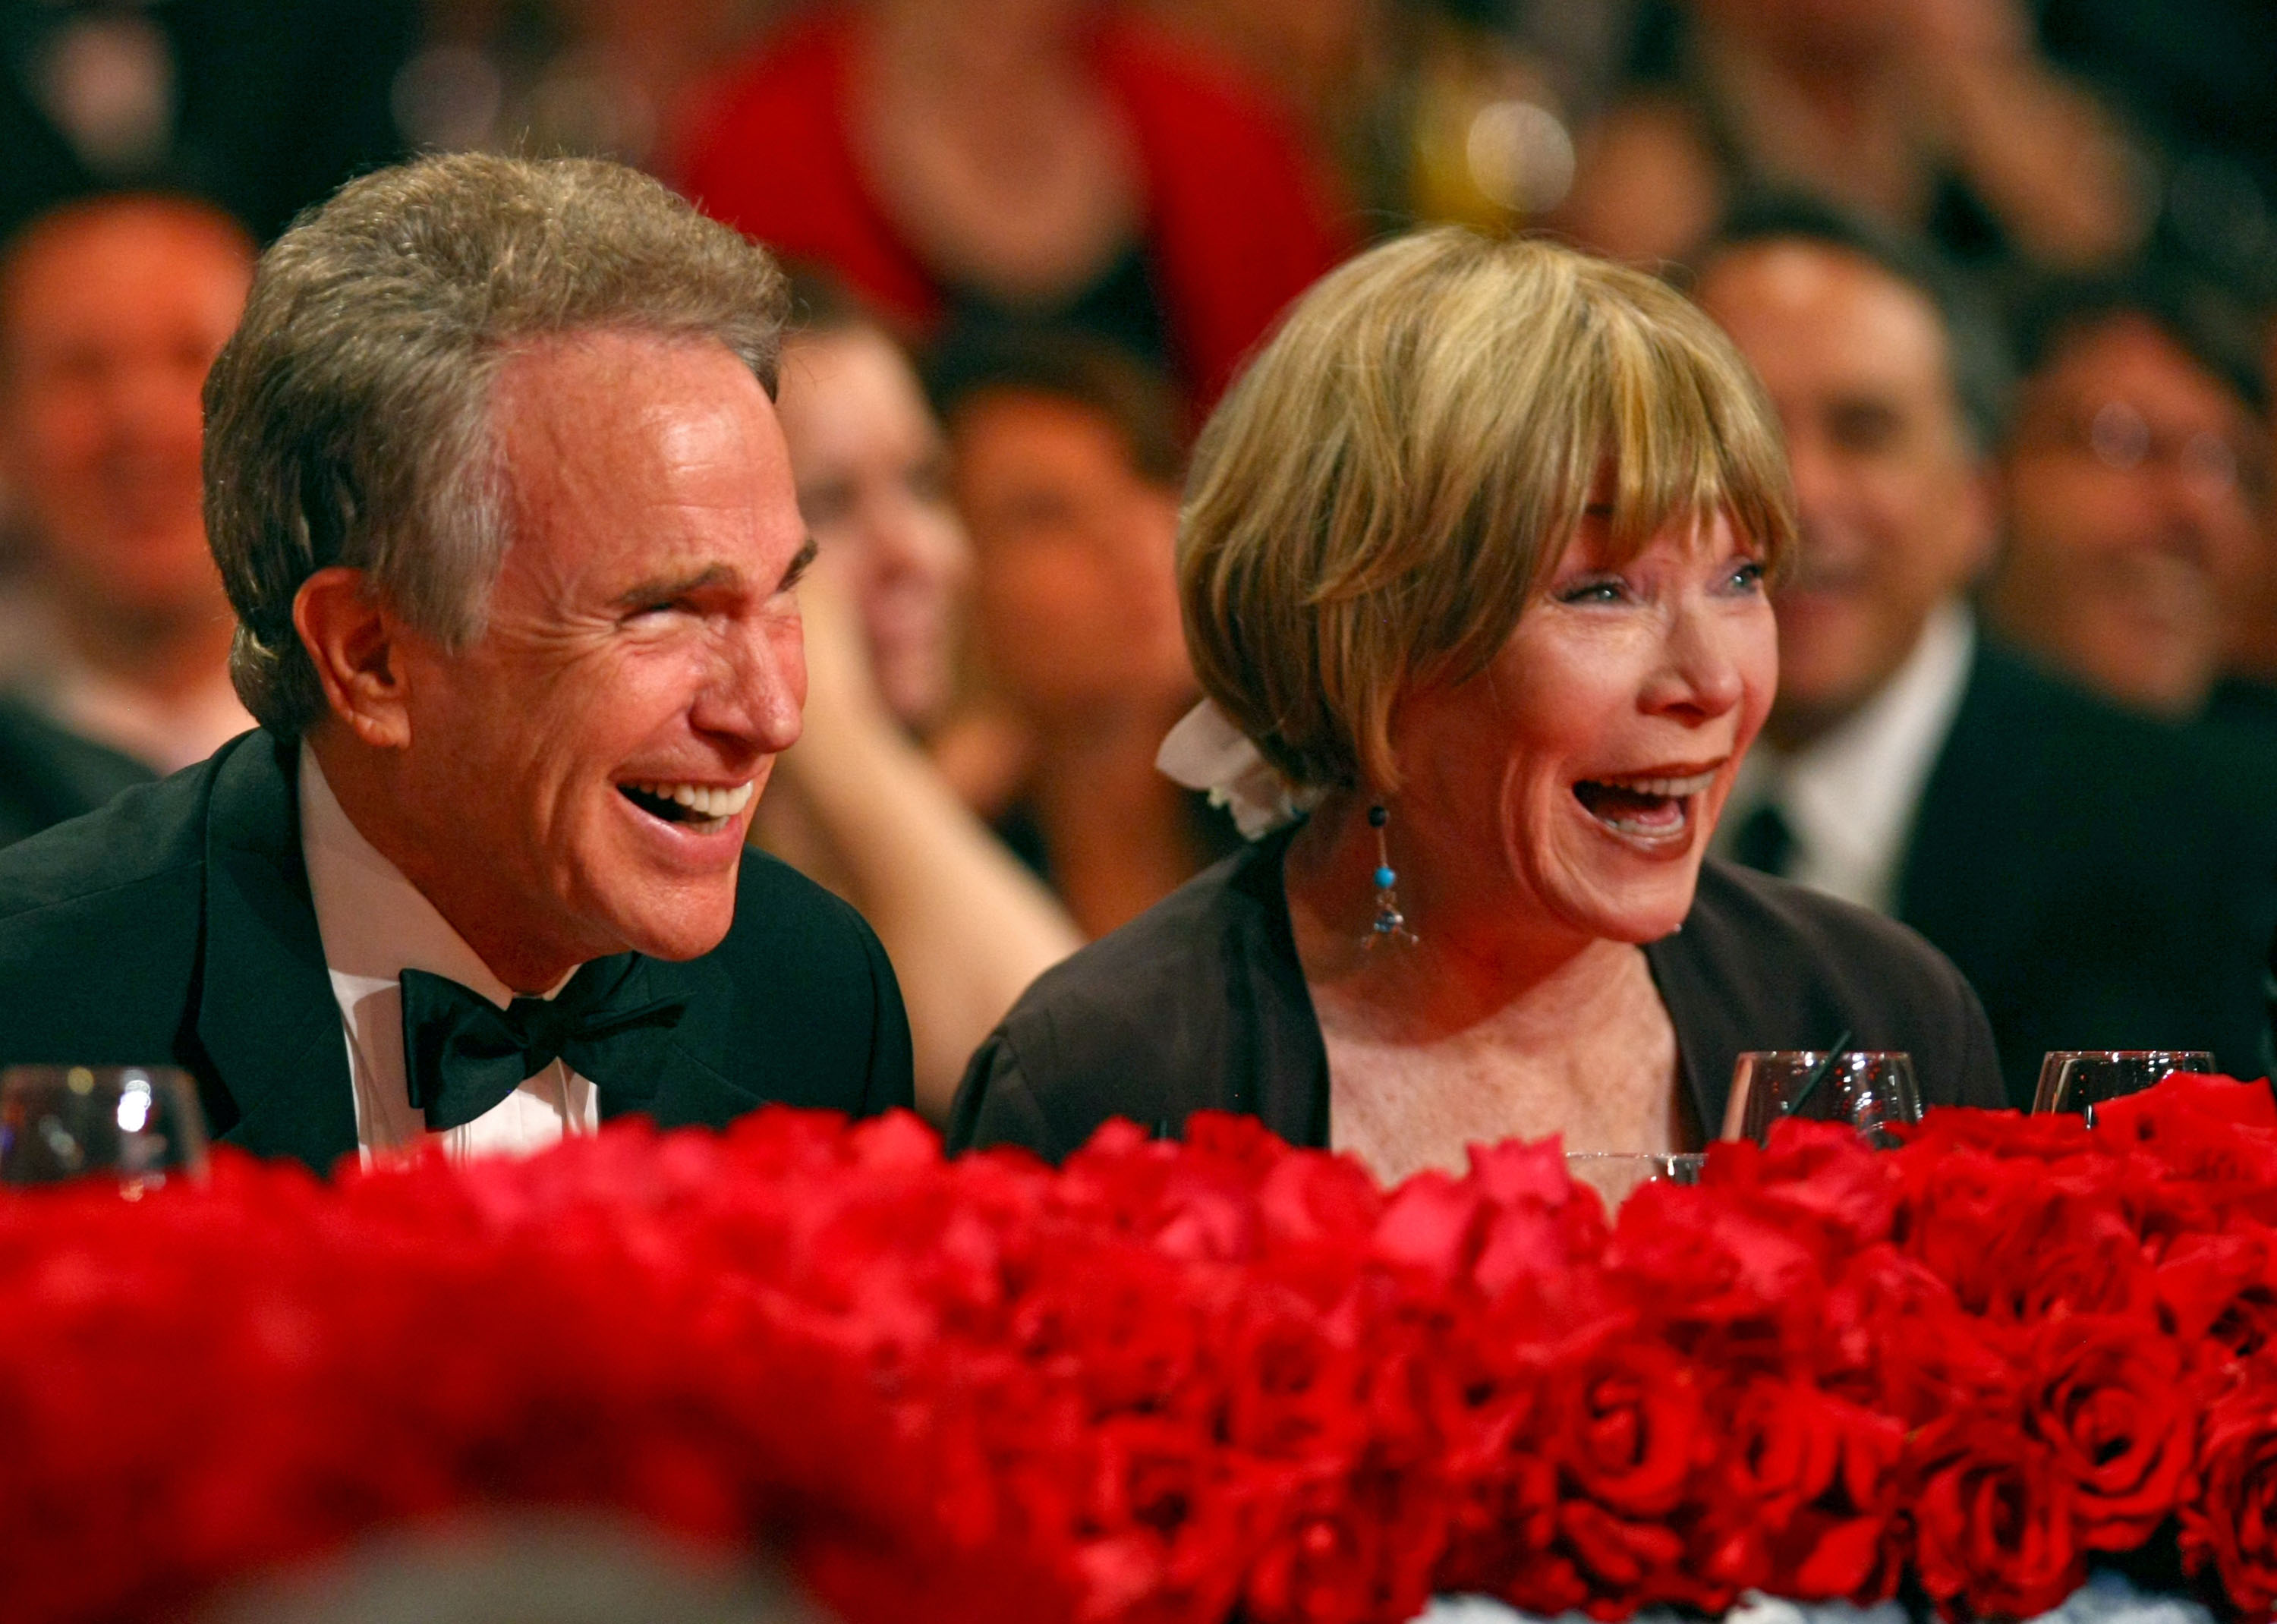 Warren Beatty and Shirley MacLaine in the audience during the 36th AFI Life Achievement Award tribute to Warren Beatty held in Hollywood, California, on June 11, 2008. | Source: Getty Images